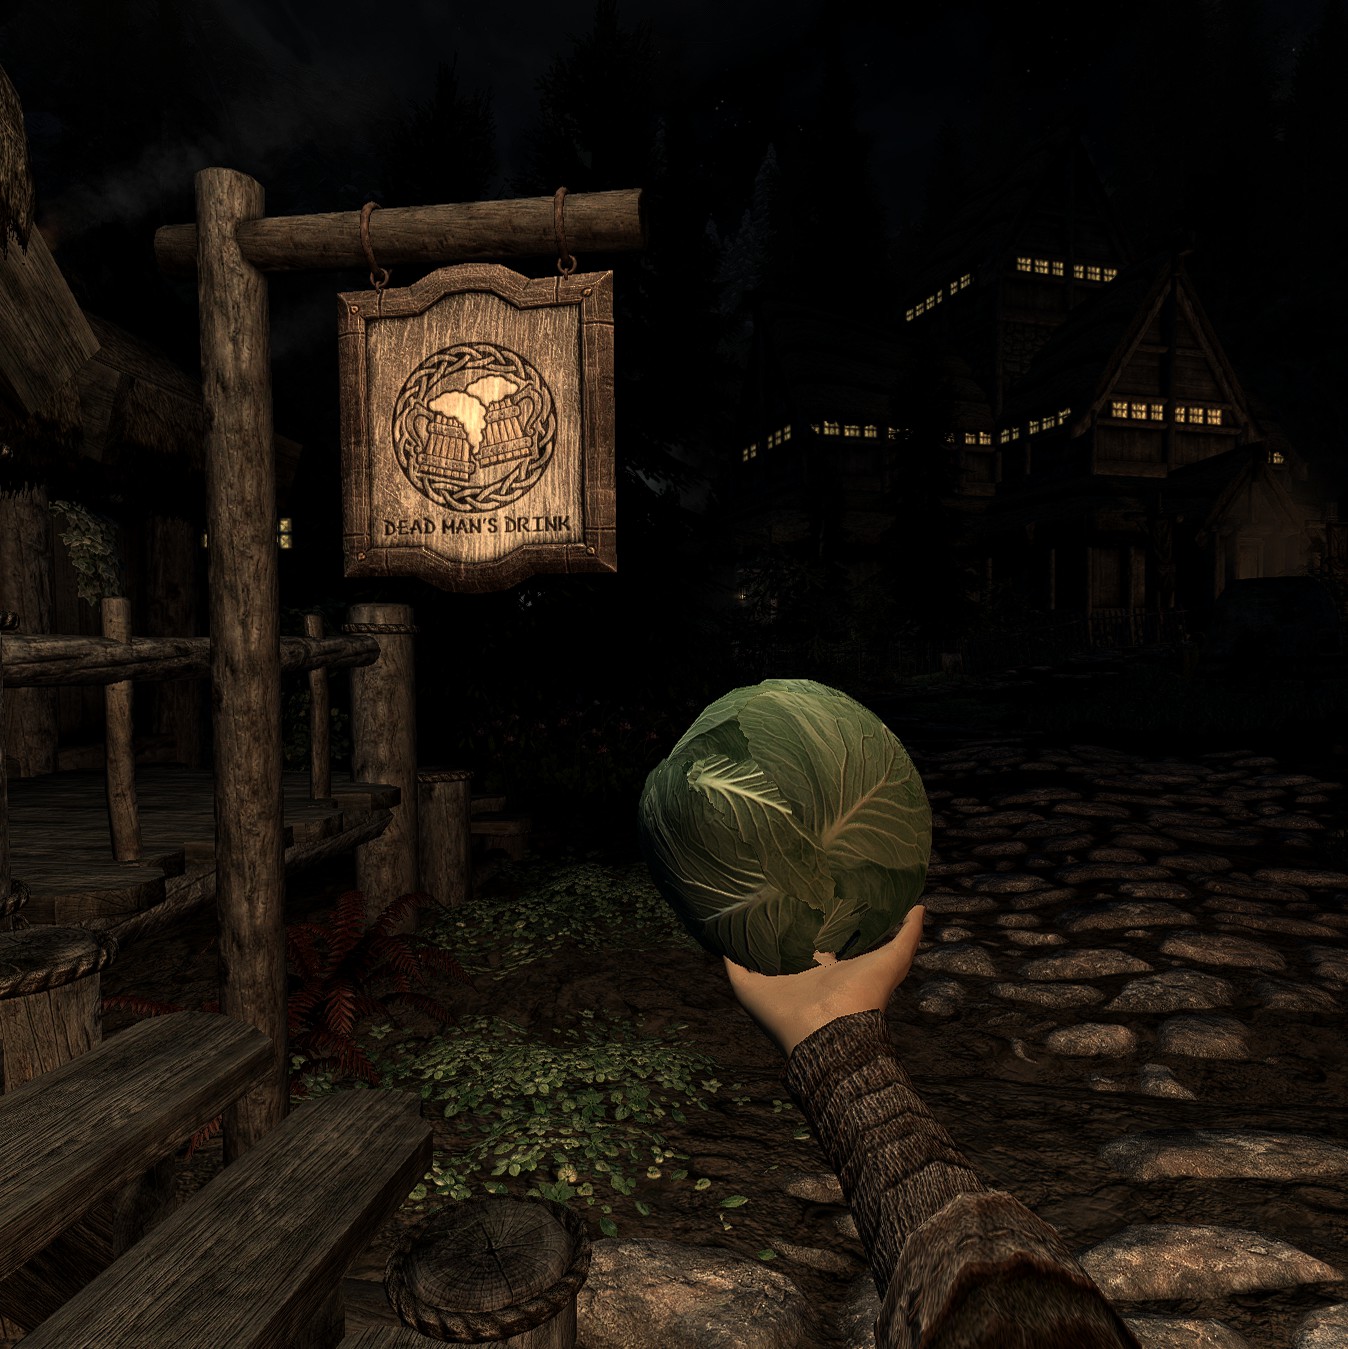 Gentage sig kollidere unse Here's a mod to put Gravity Gloves in Skyrim VR | PC Gamer